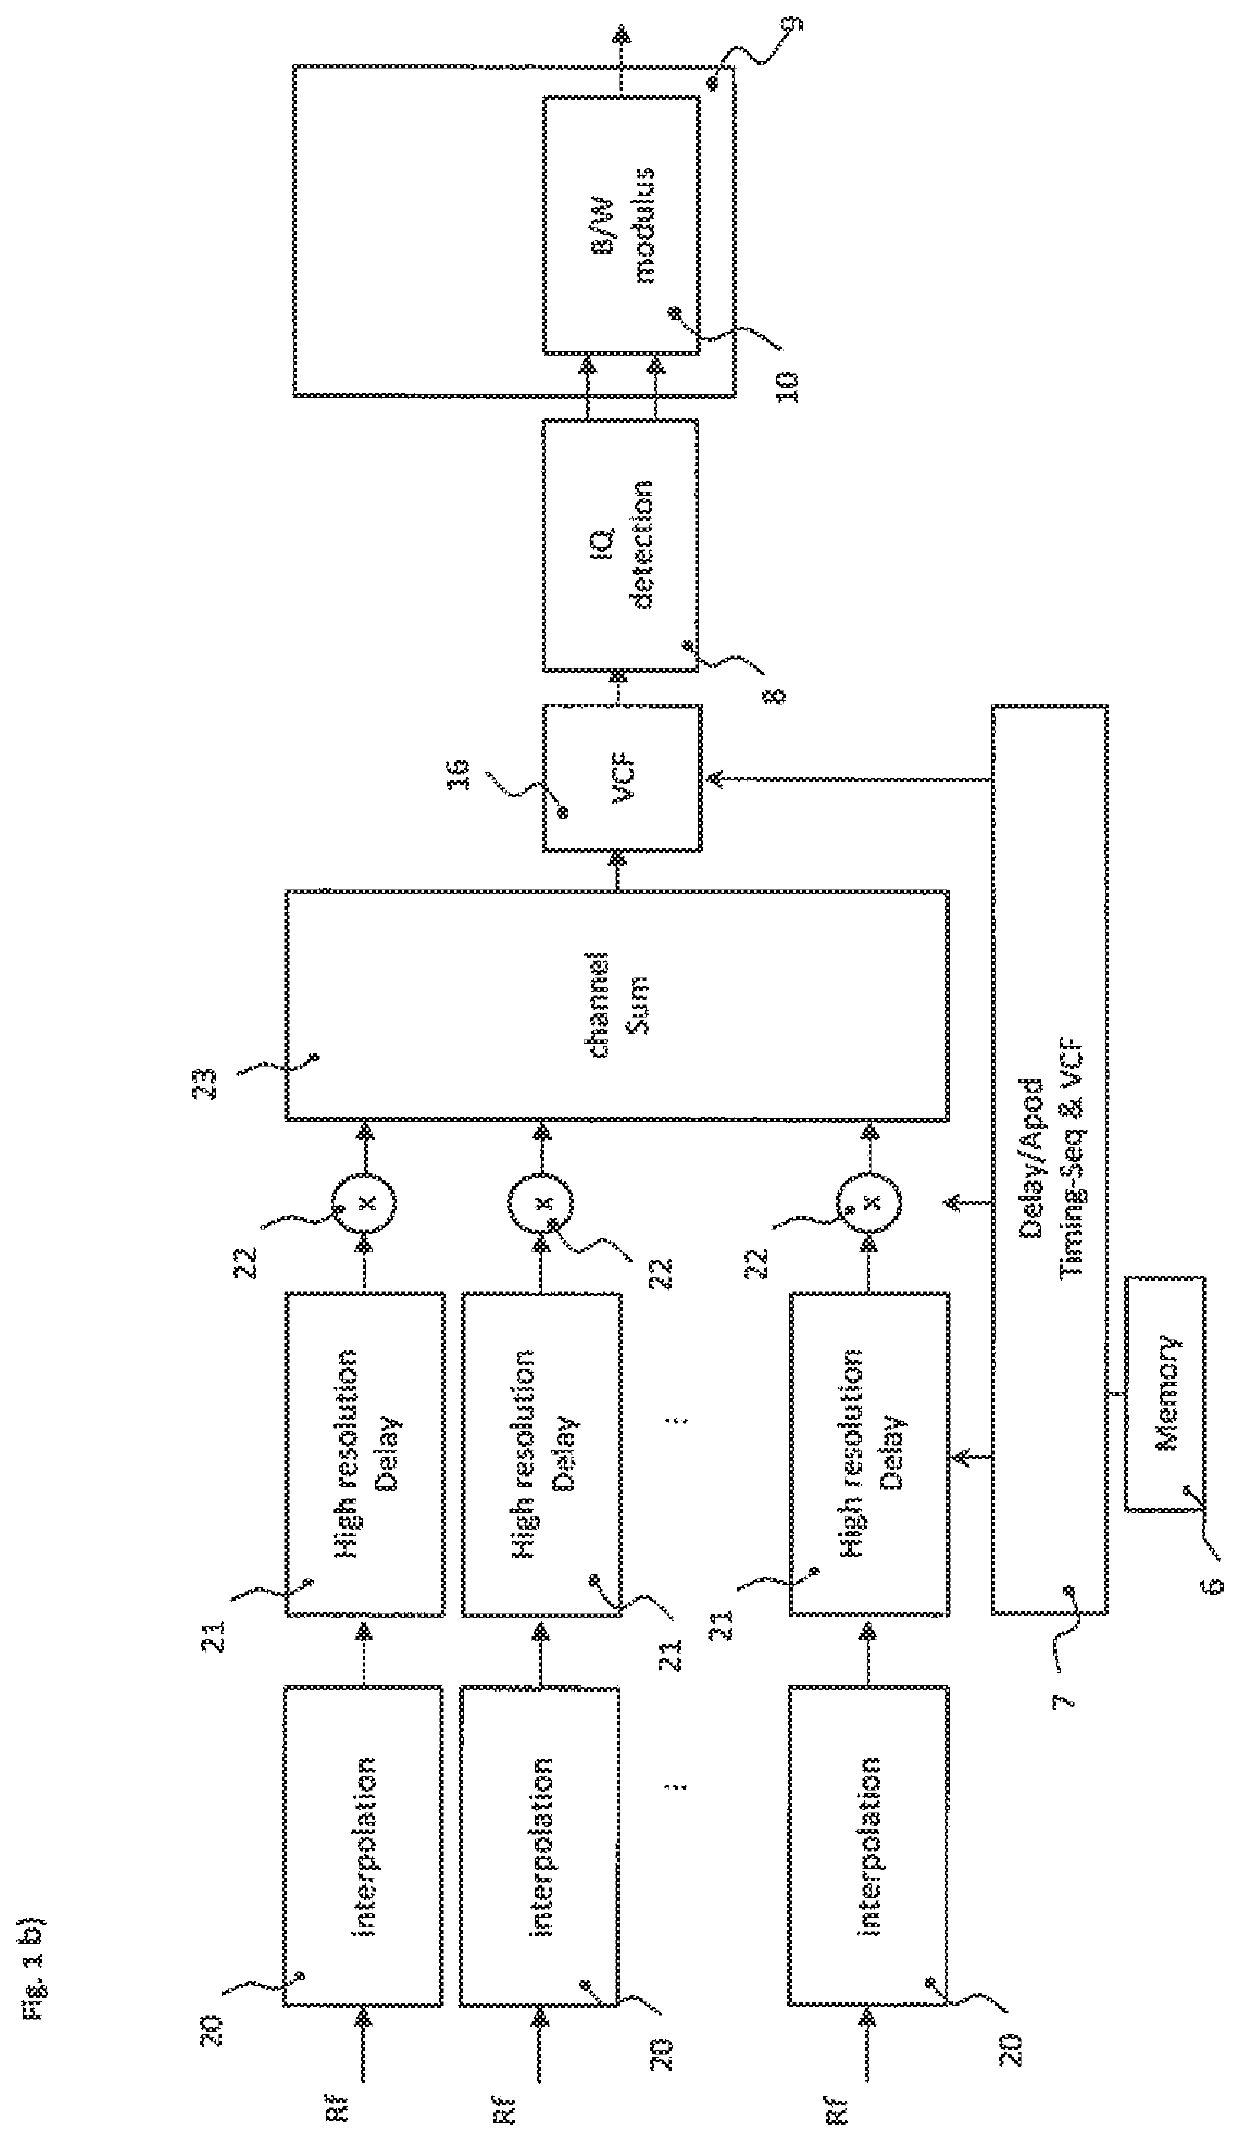 Systems and methods for distortion free multi beam ultrasound receive beamforming